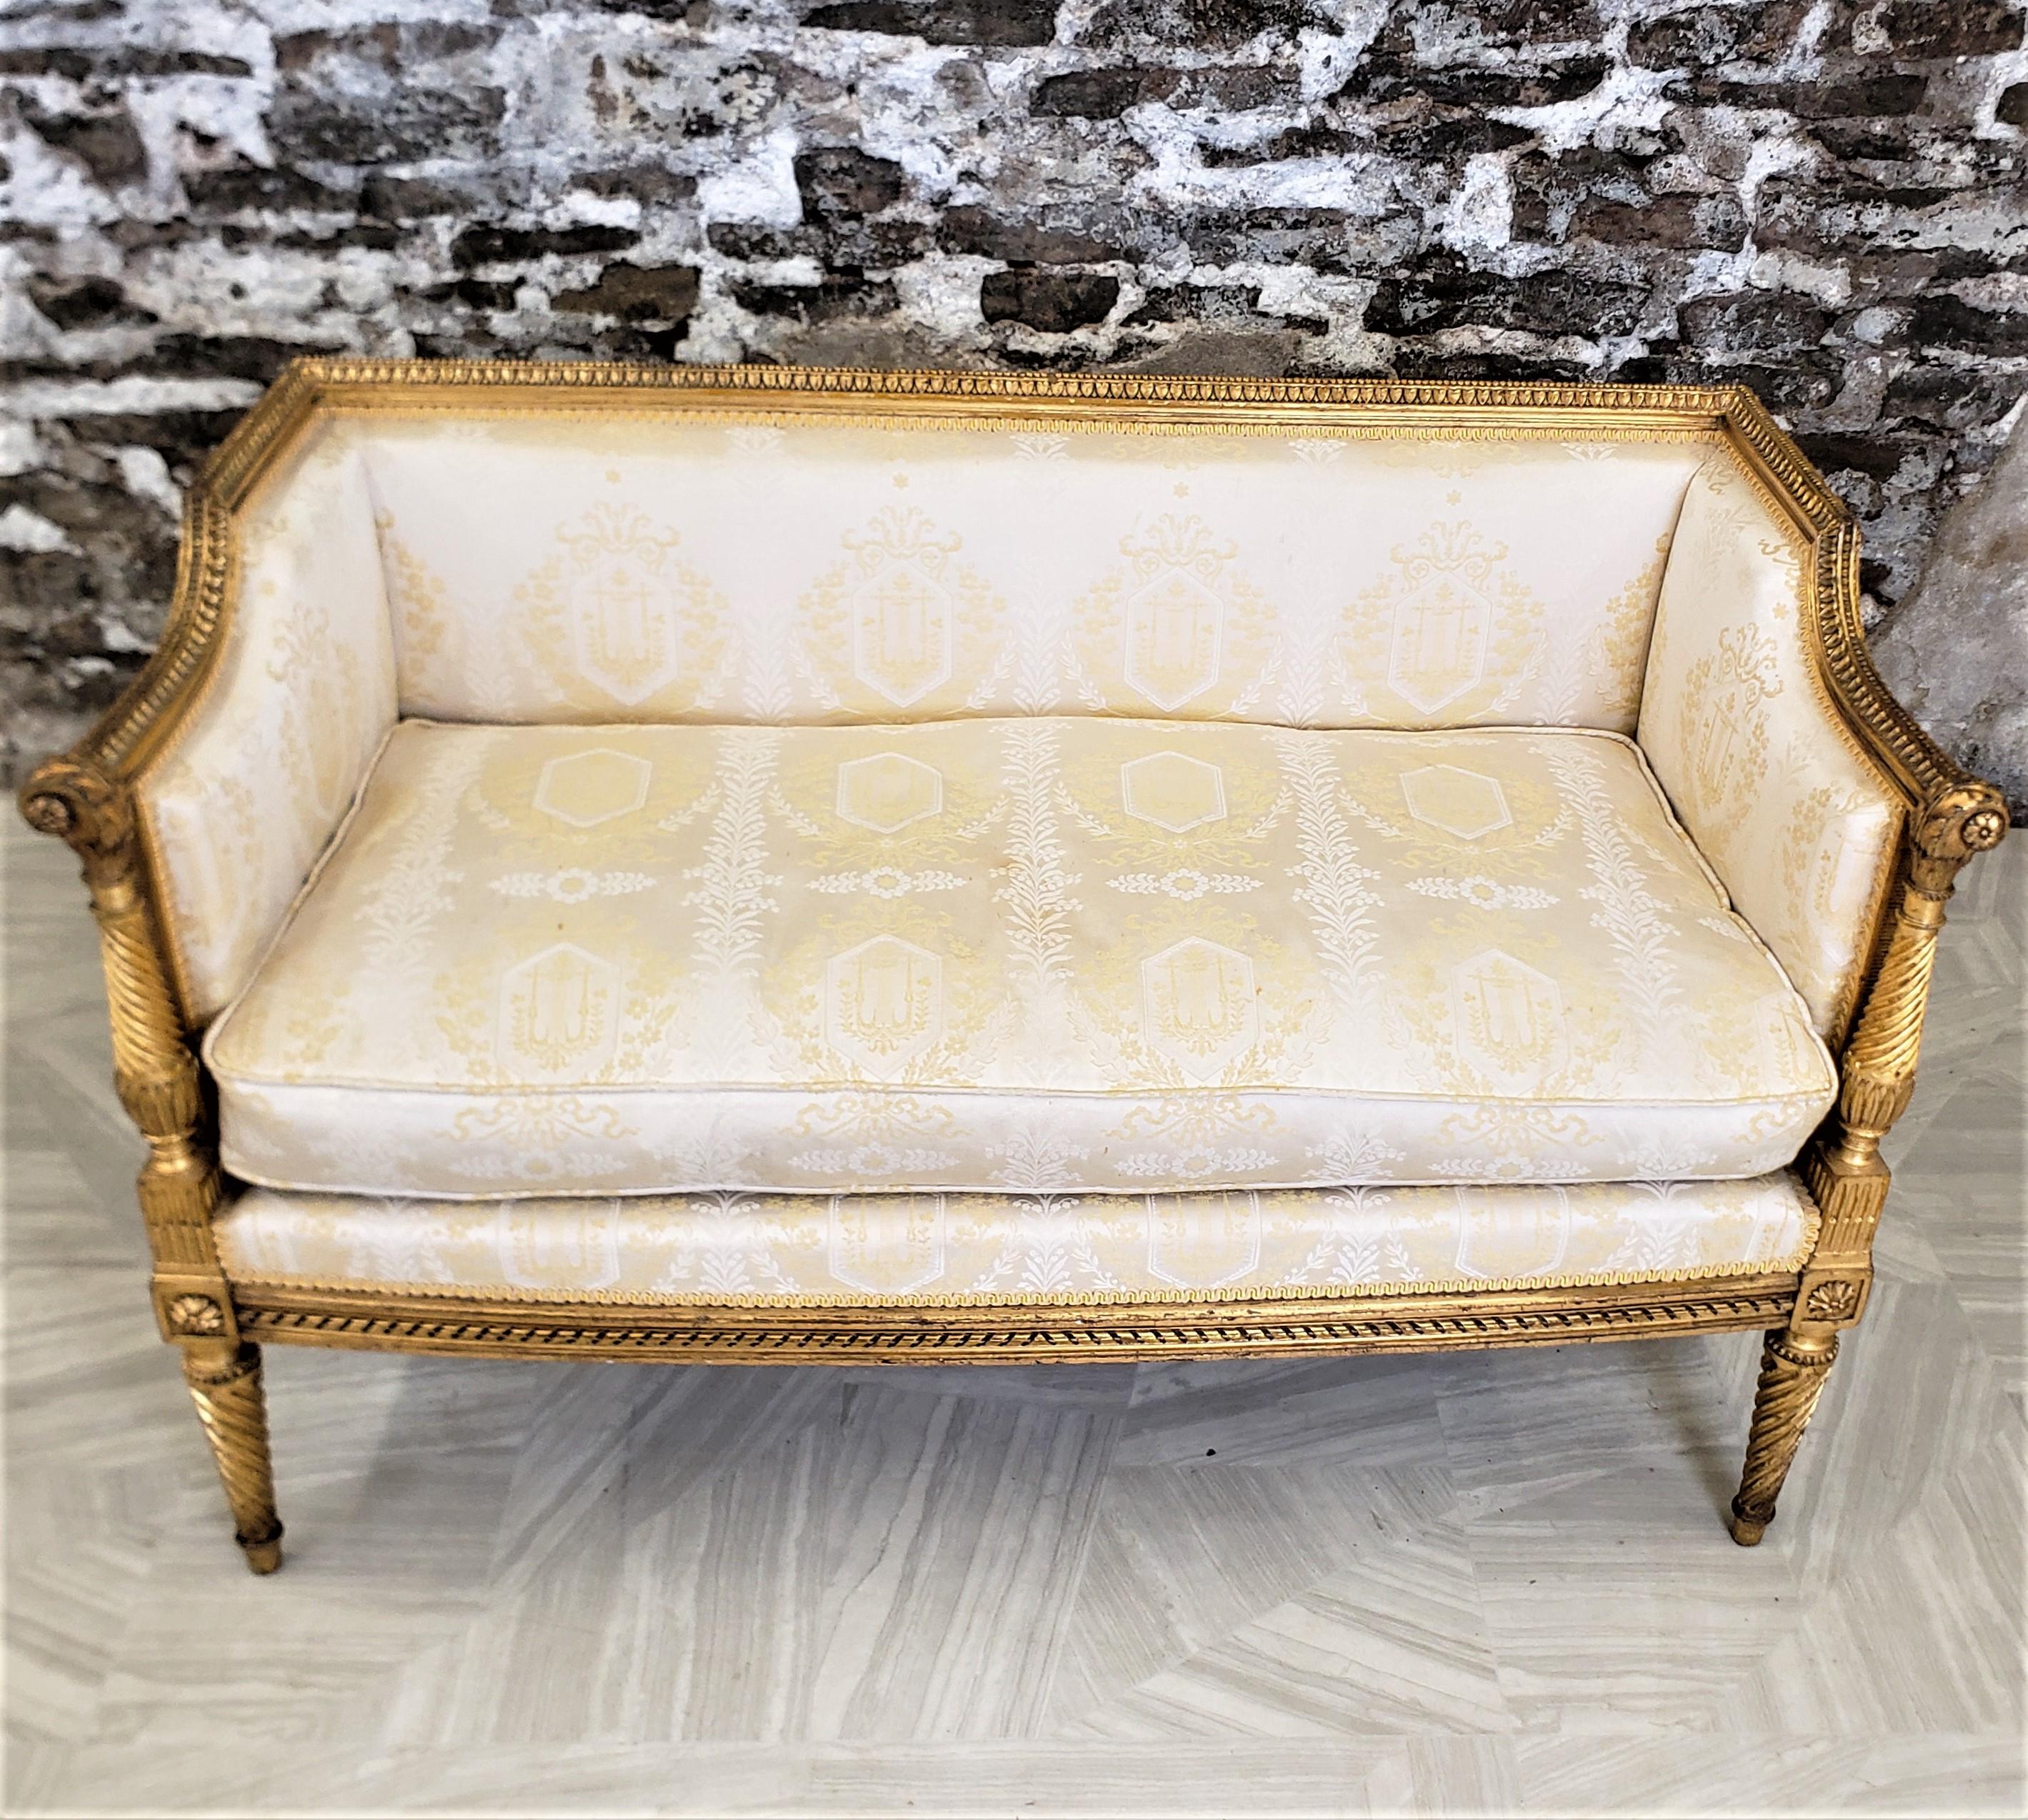 20th Century Antique French Directoire Styled Settee with Hand-Carved Giltwood Accents